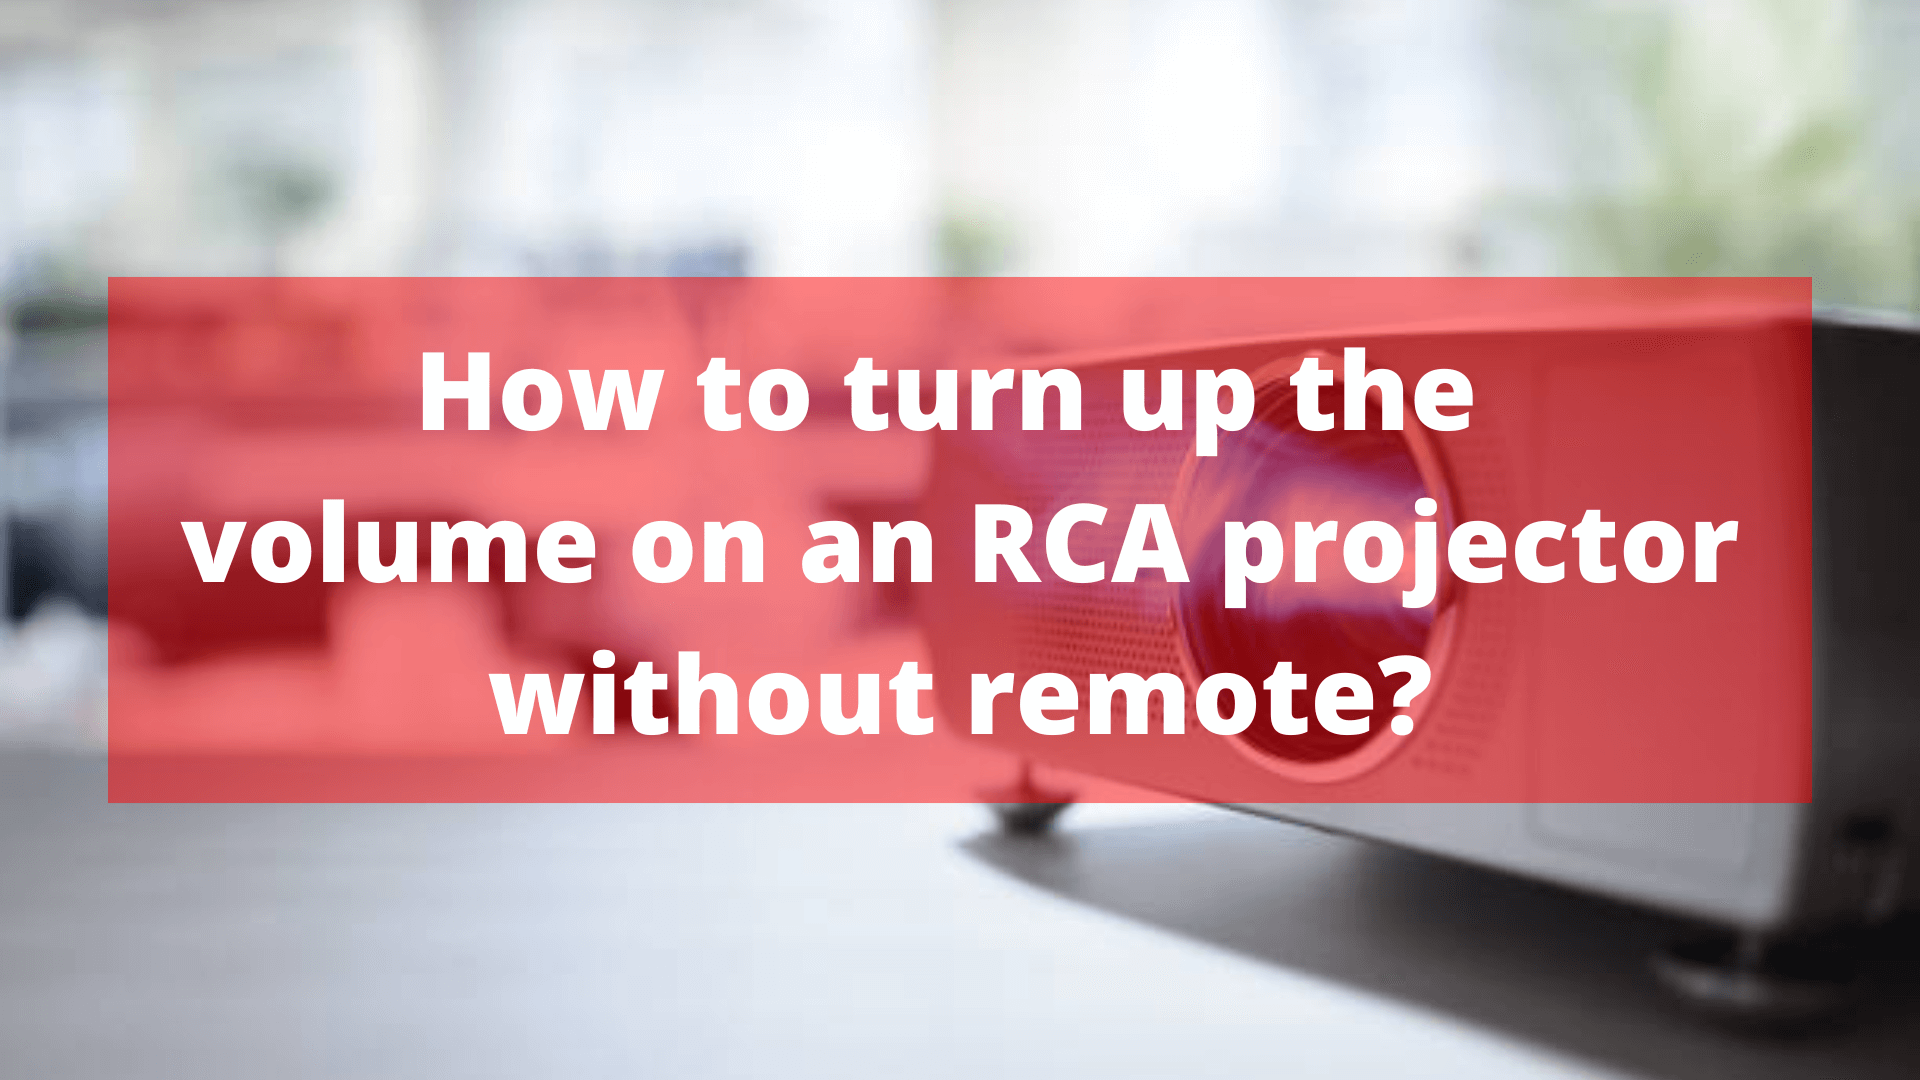 How to turn up the volume on an RCA projector without remote